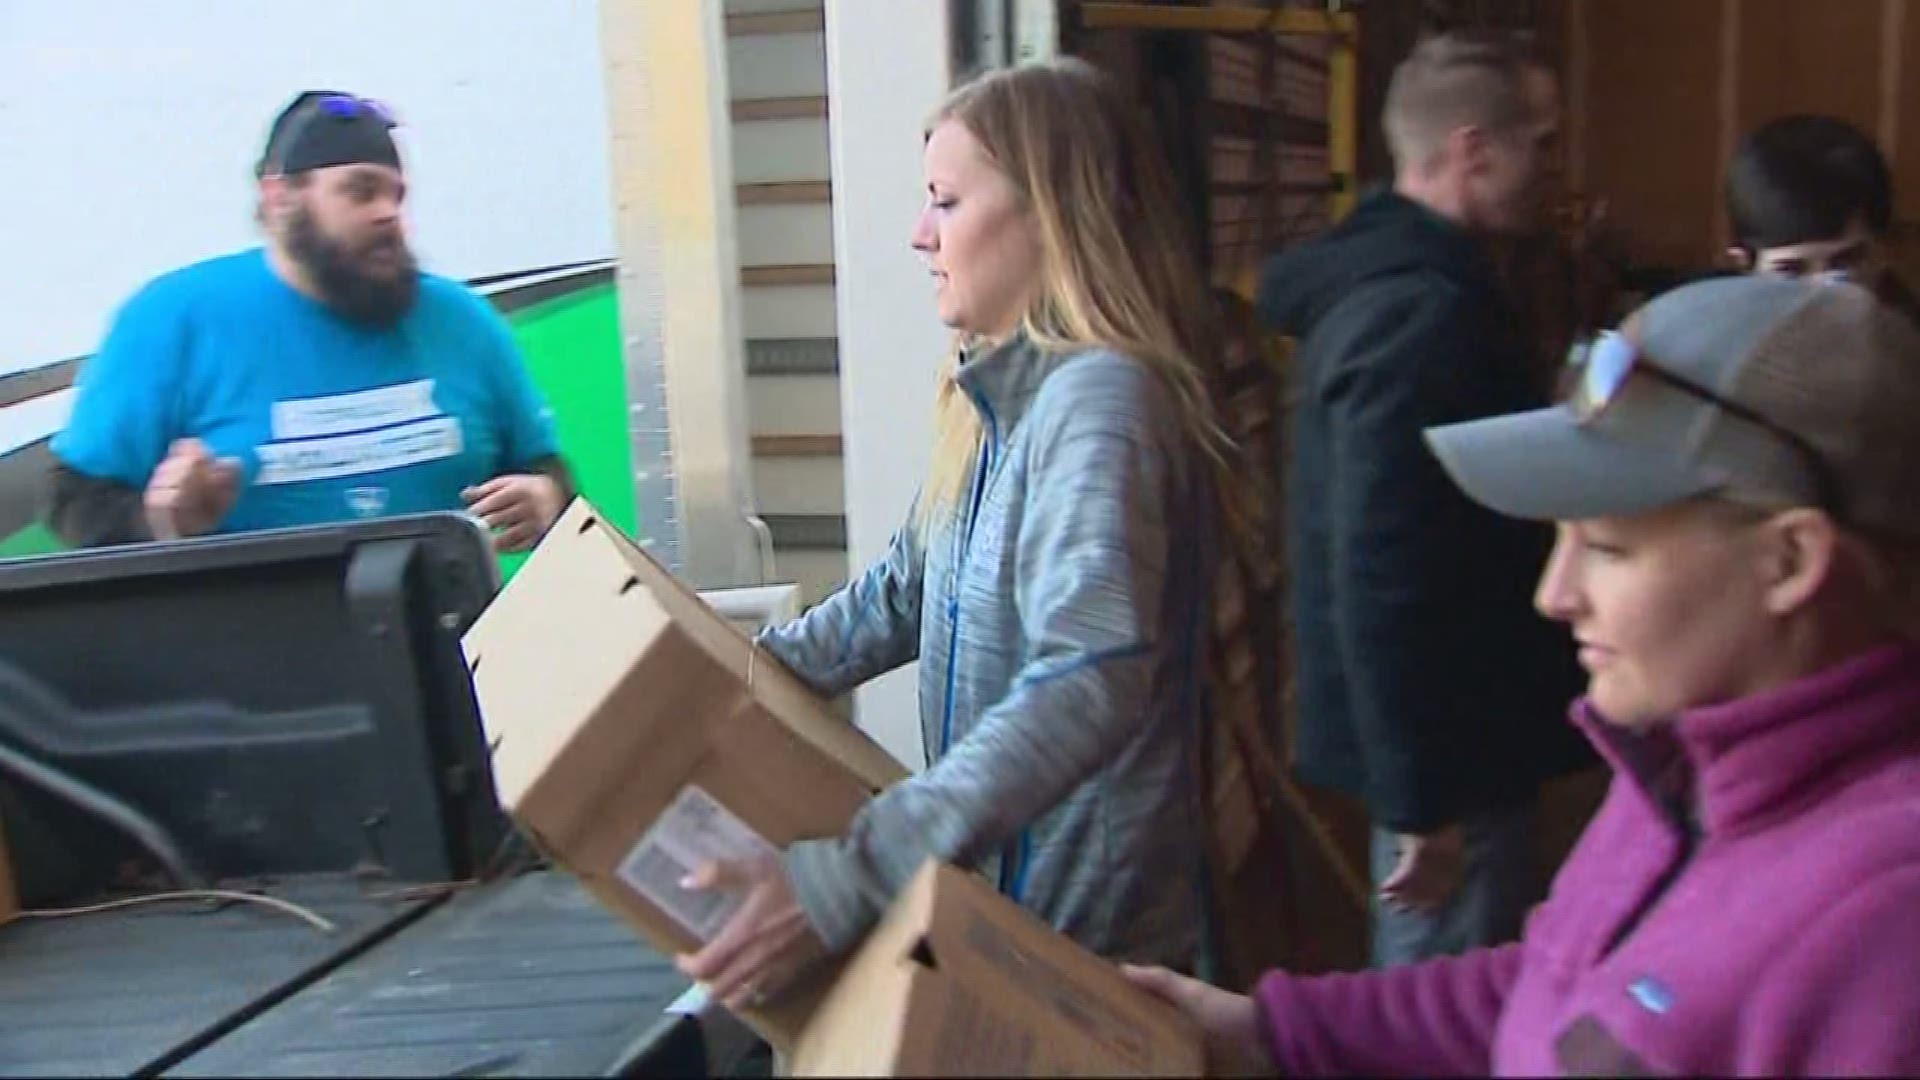 Local volunteers delivered 500 turkeys to Loaves and Fishes, to make sure all their clients have a Thanksgiving meals.